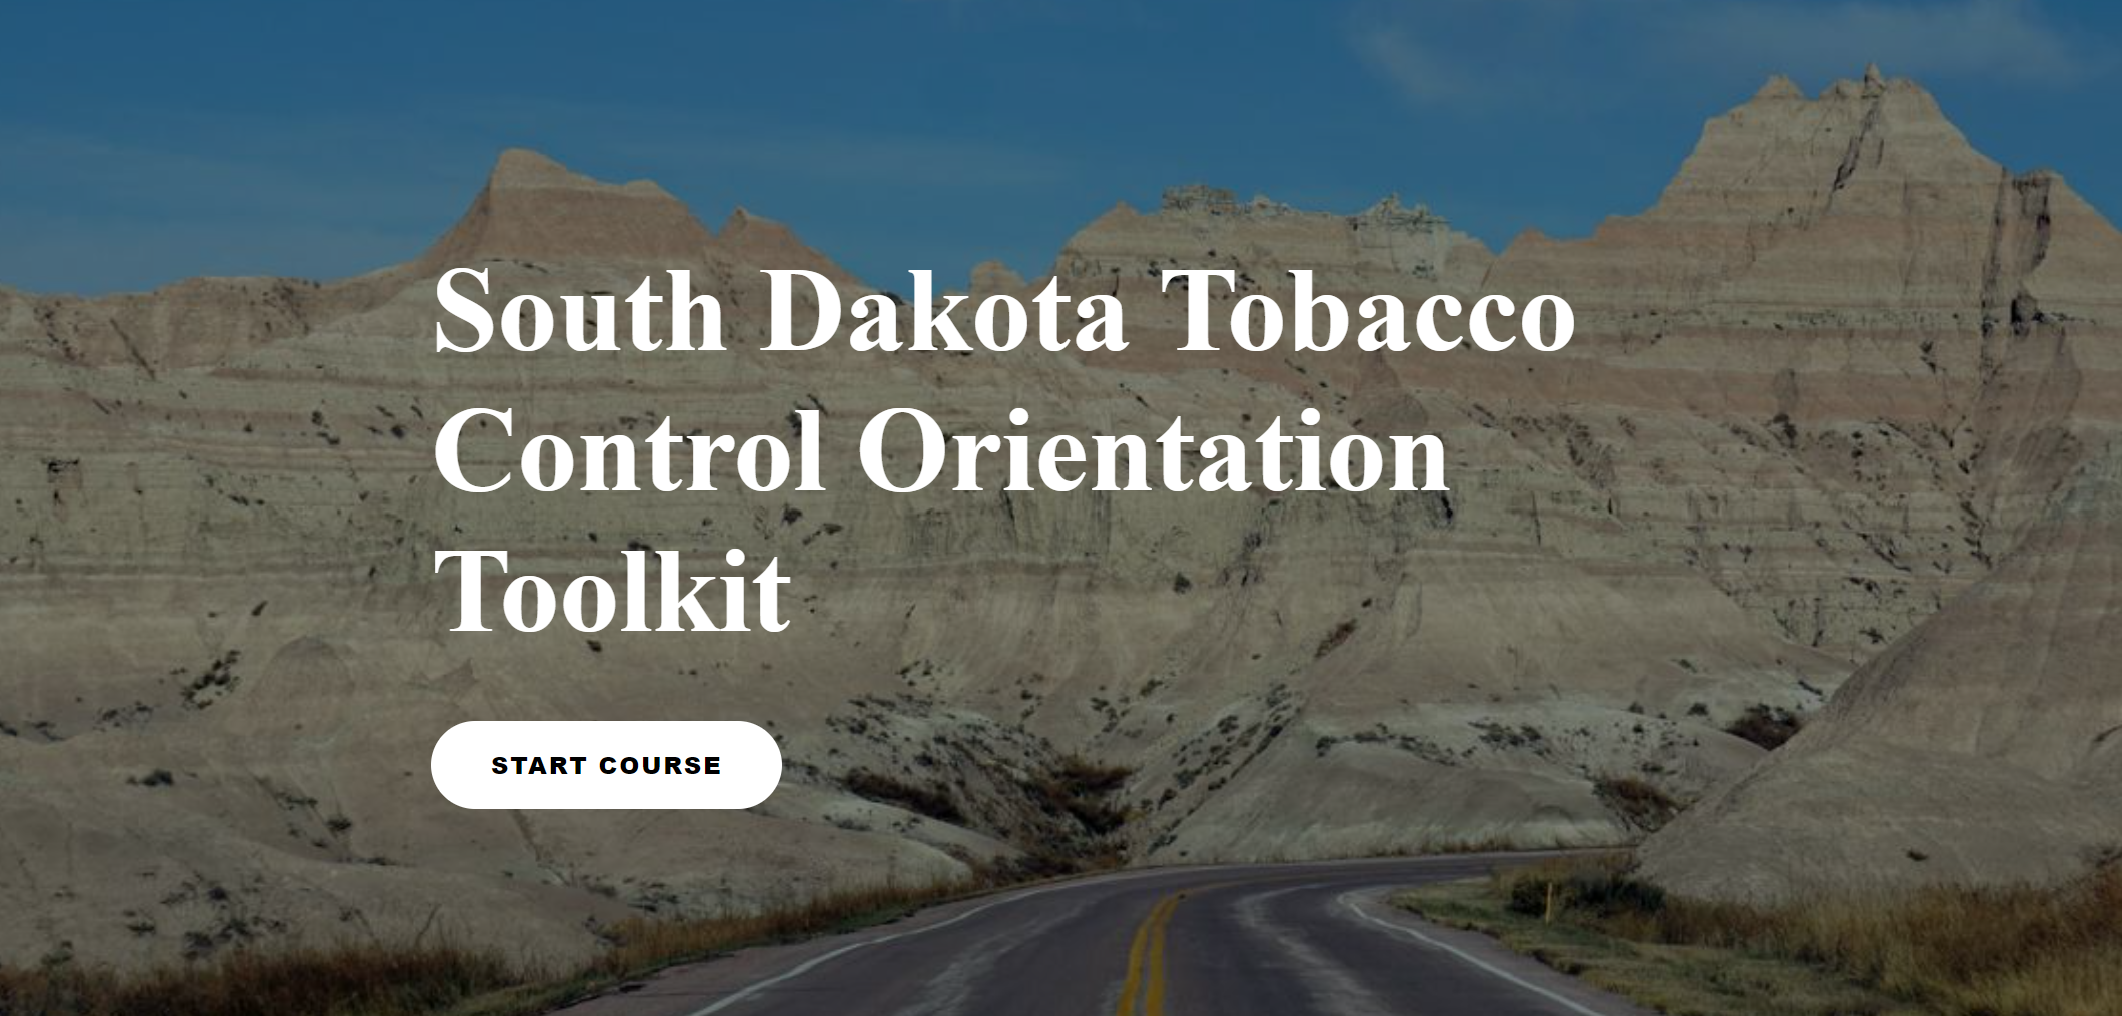 Background of image is of the South Dakota Badlands. Words overlay say "South Dakota Tobacco Control orientation Toolkit" Start Course.